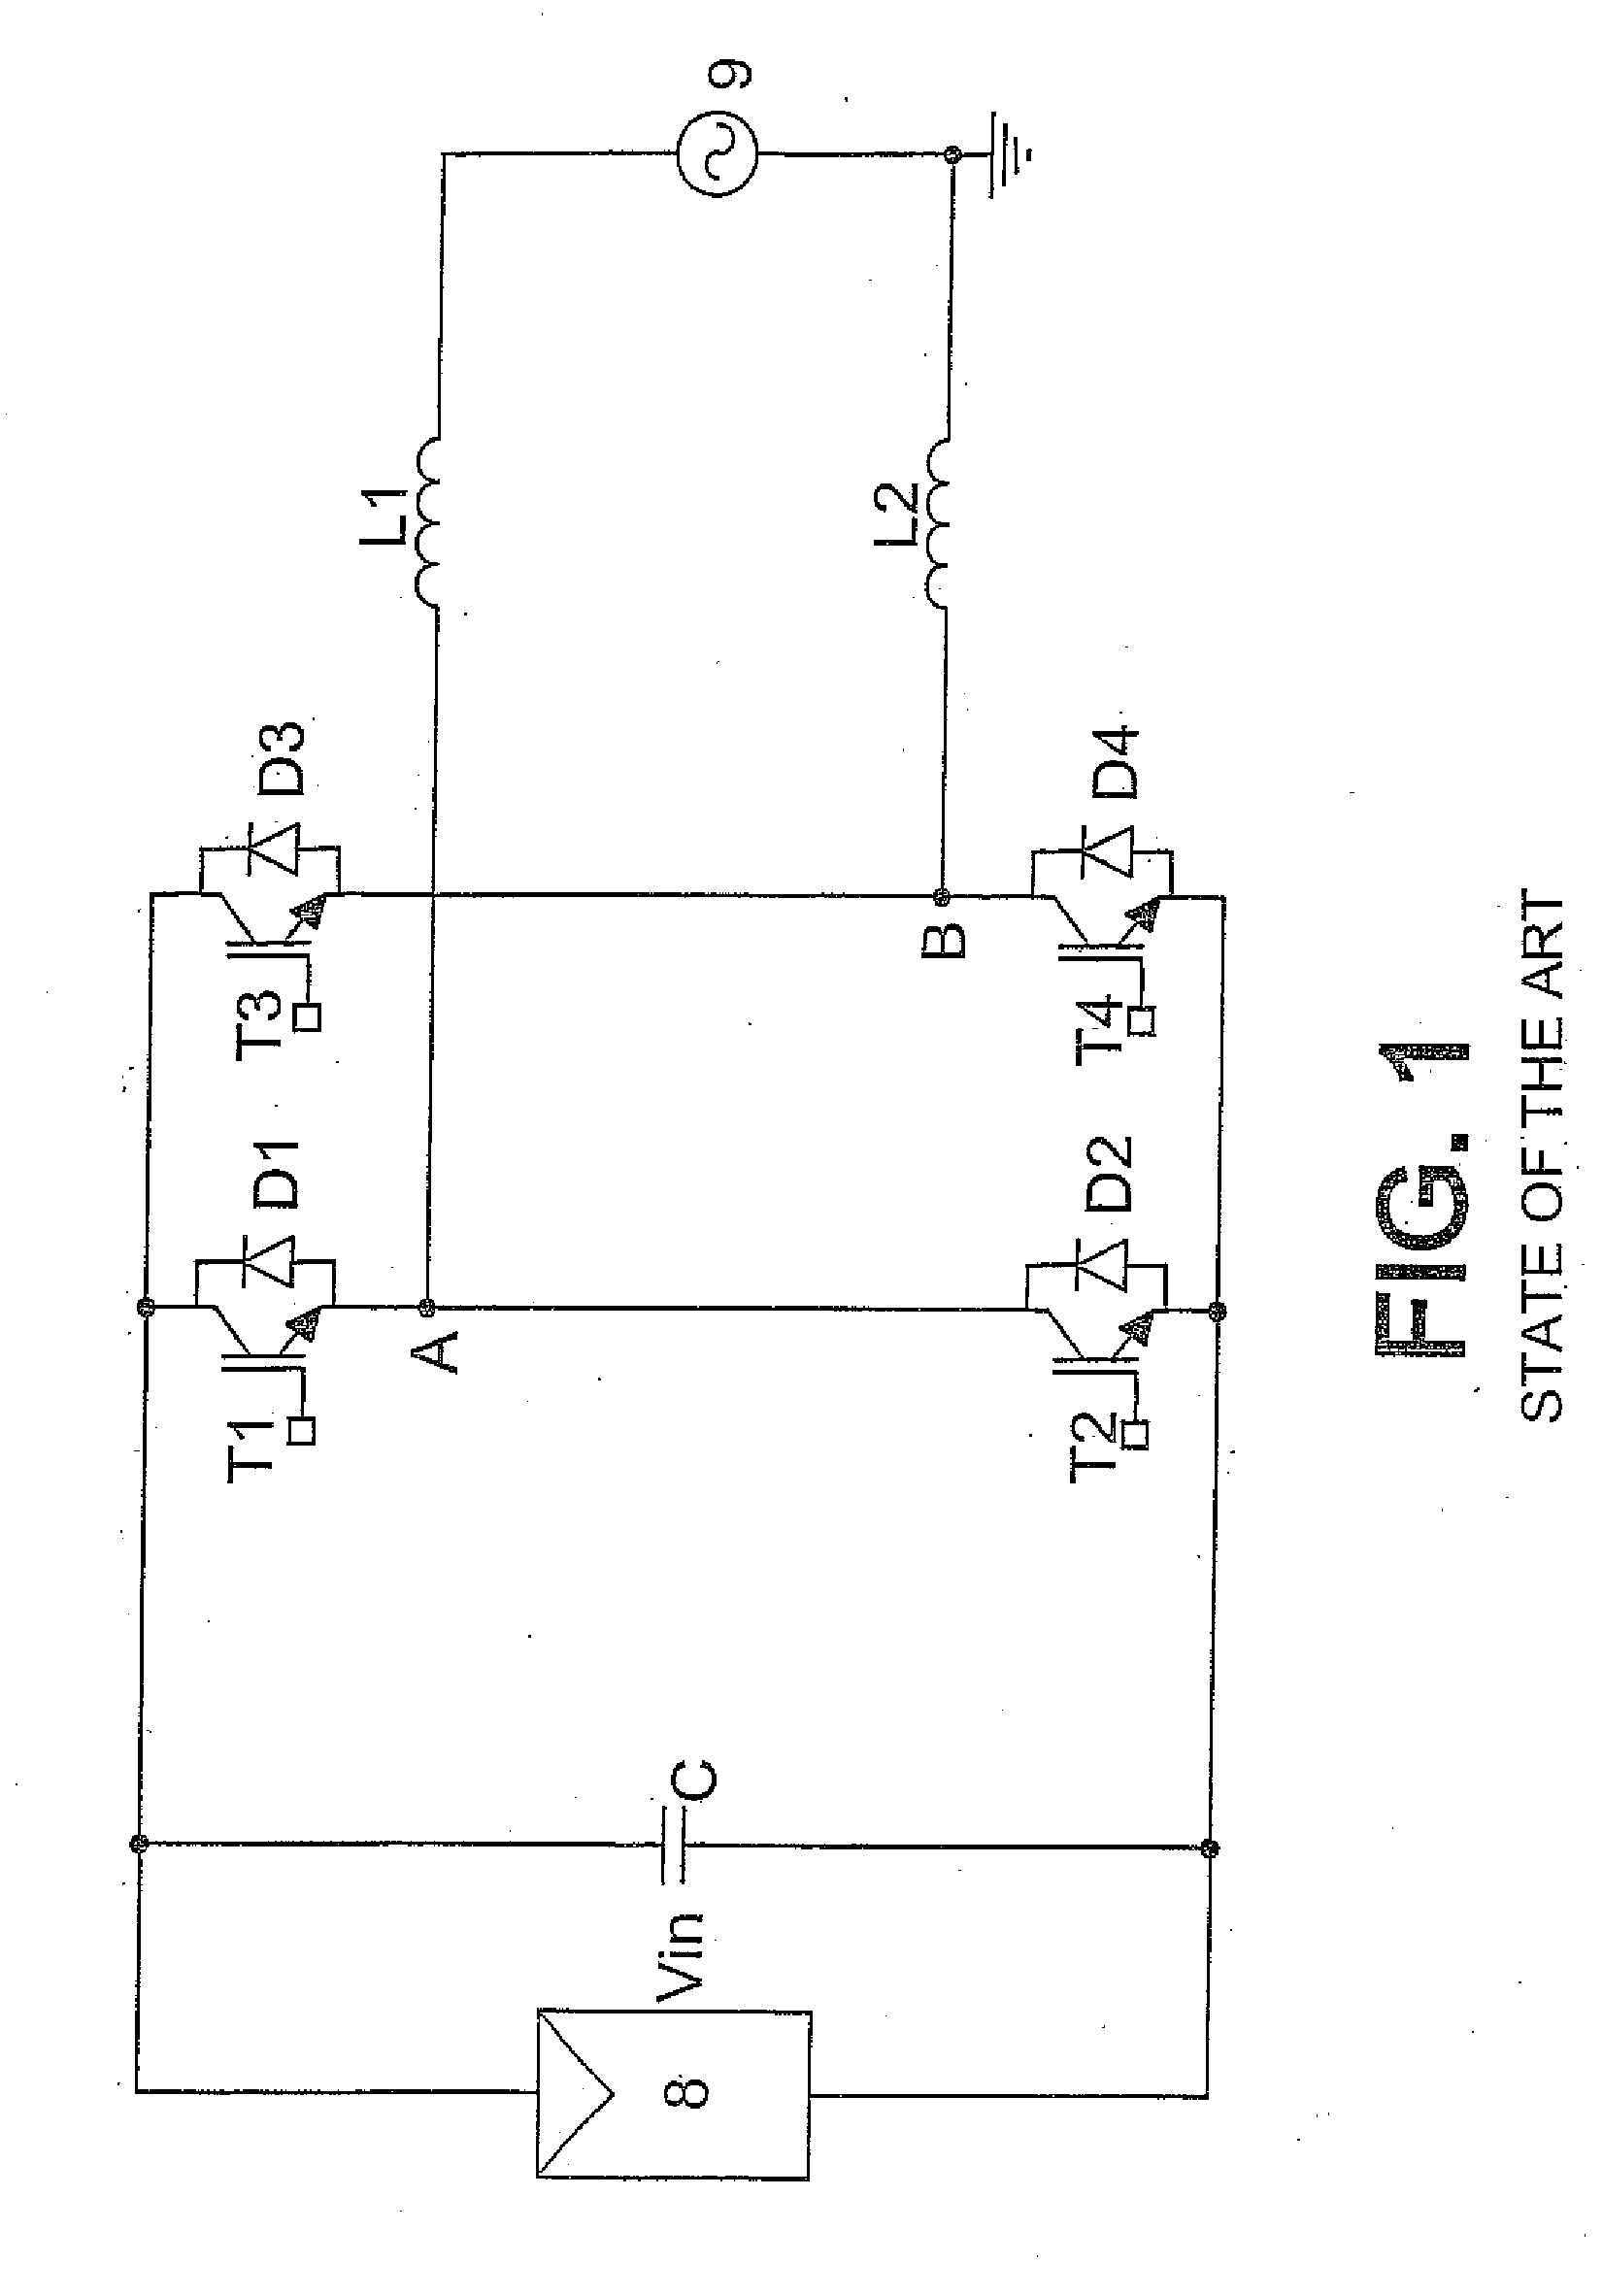 Single-phase inverter circuit to condition and transform direct current electric power into alternating current electric power